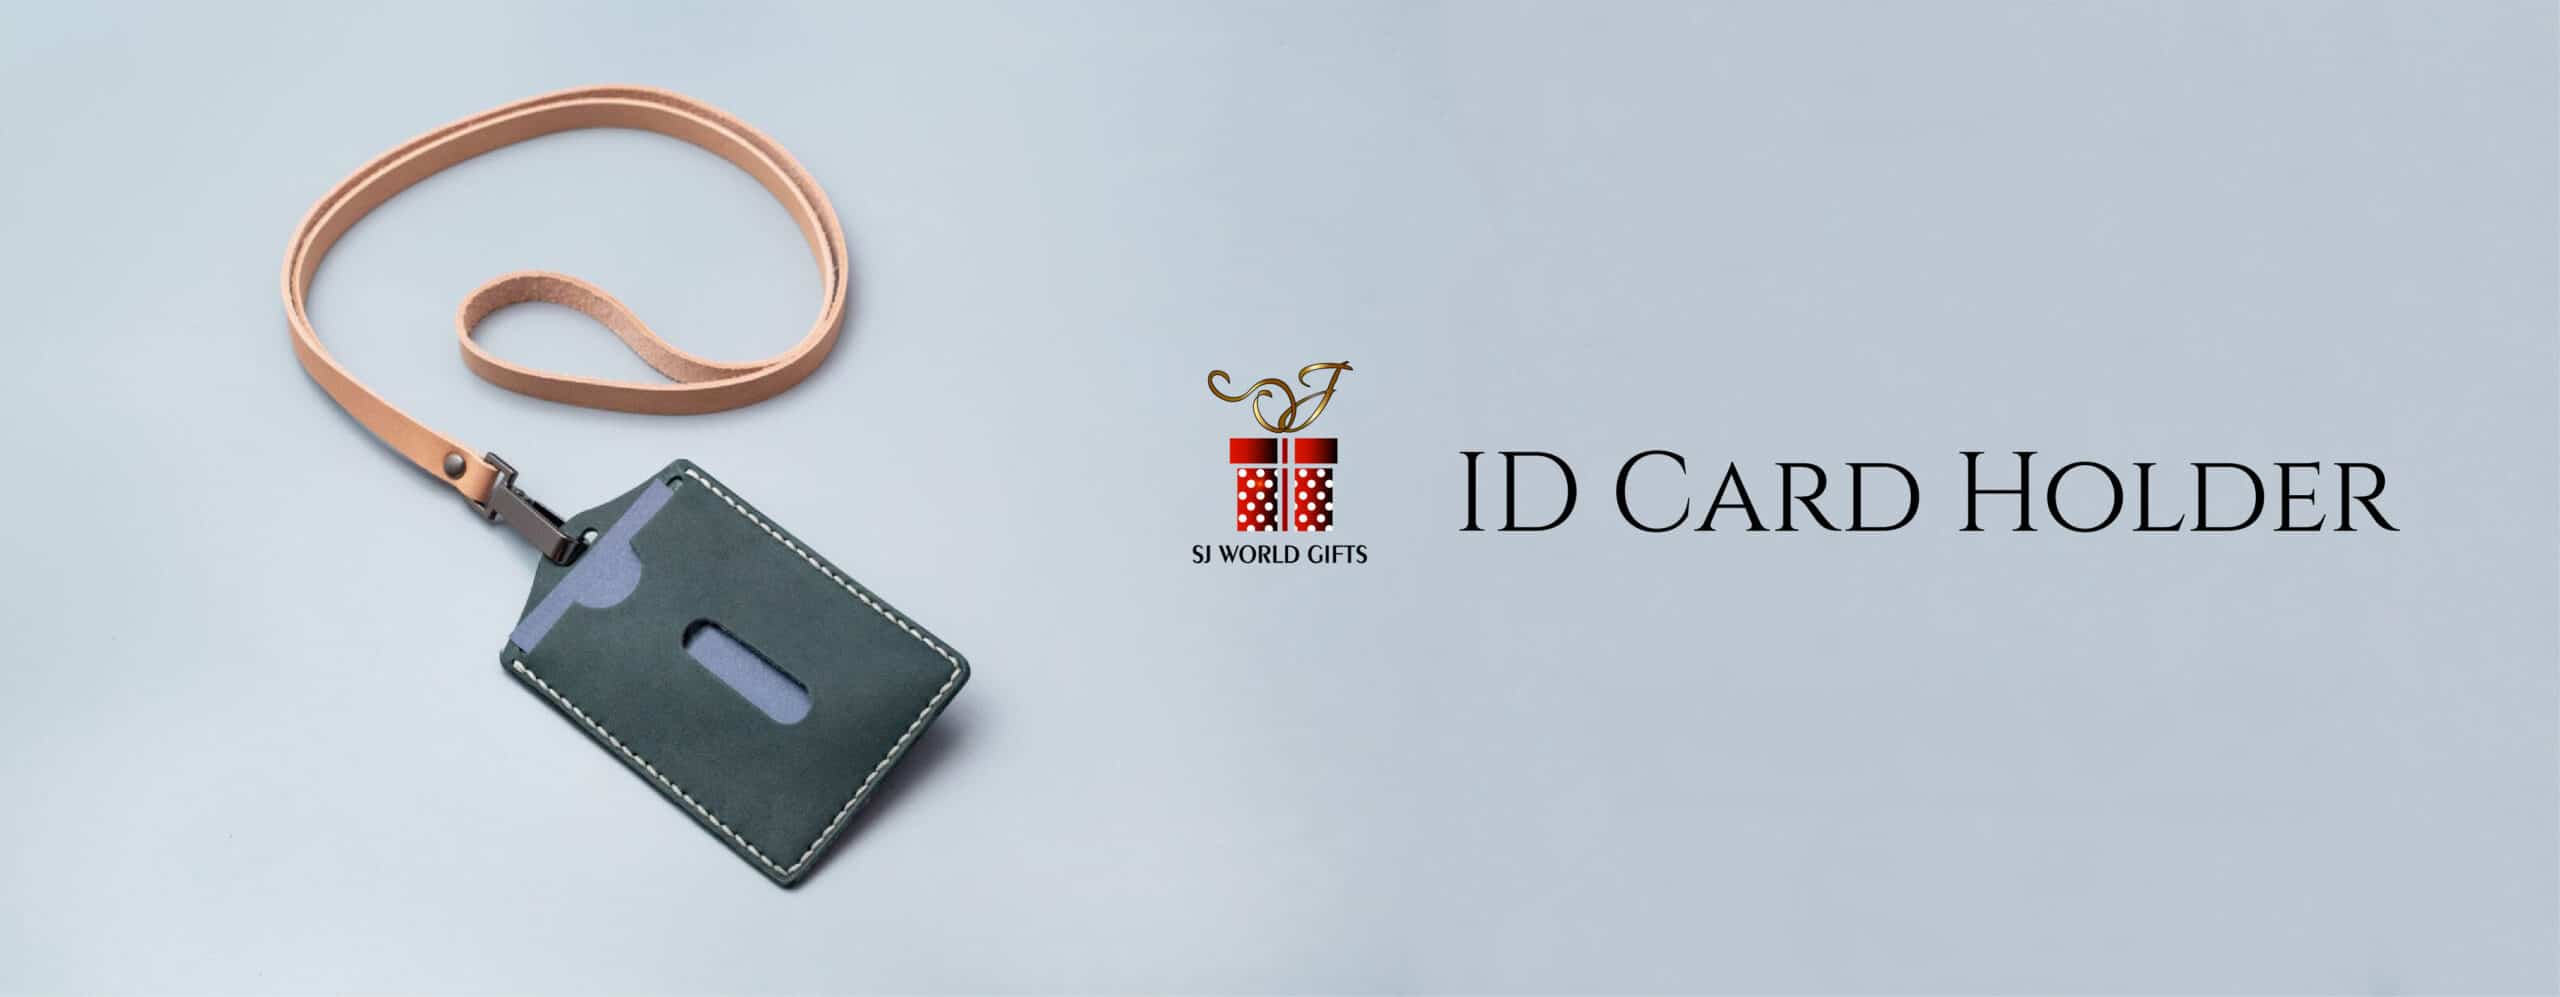 ID Card Holder by SJ-World Gifts Malaysia | Trusted Premium Gift and Corporate Gift Supplier in Malaysia